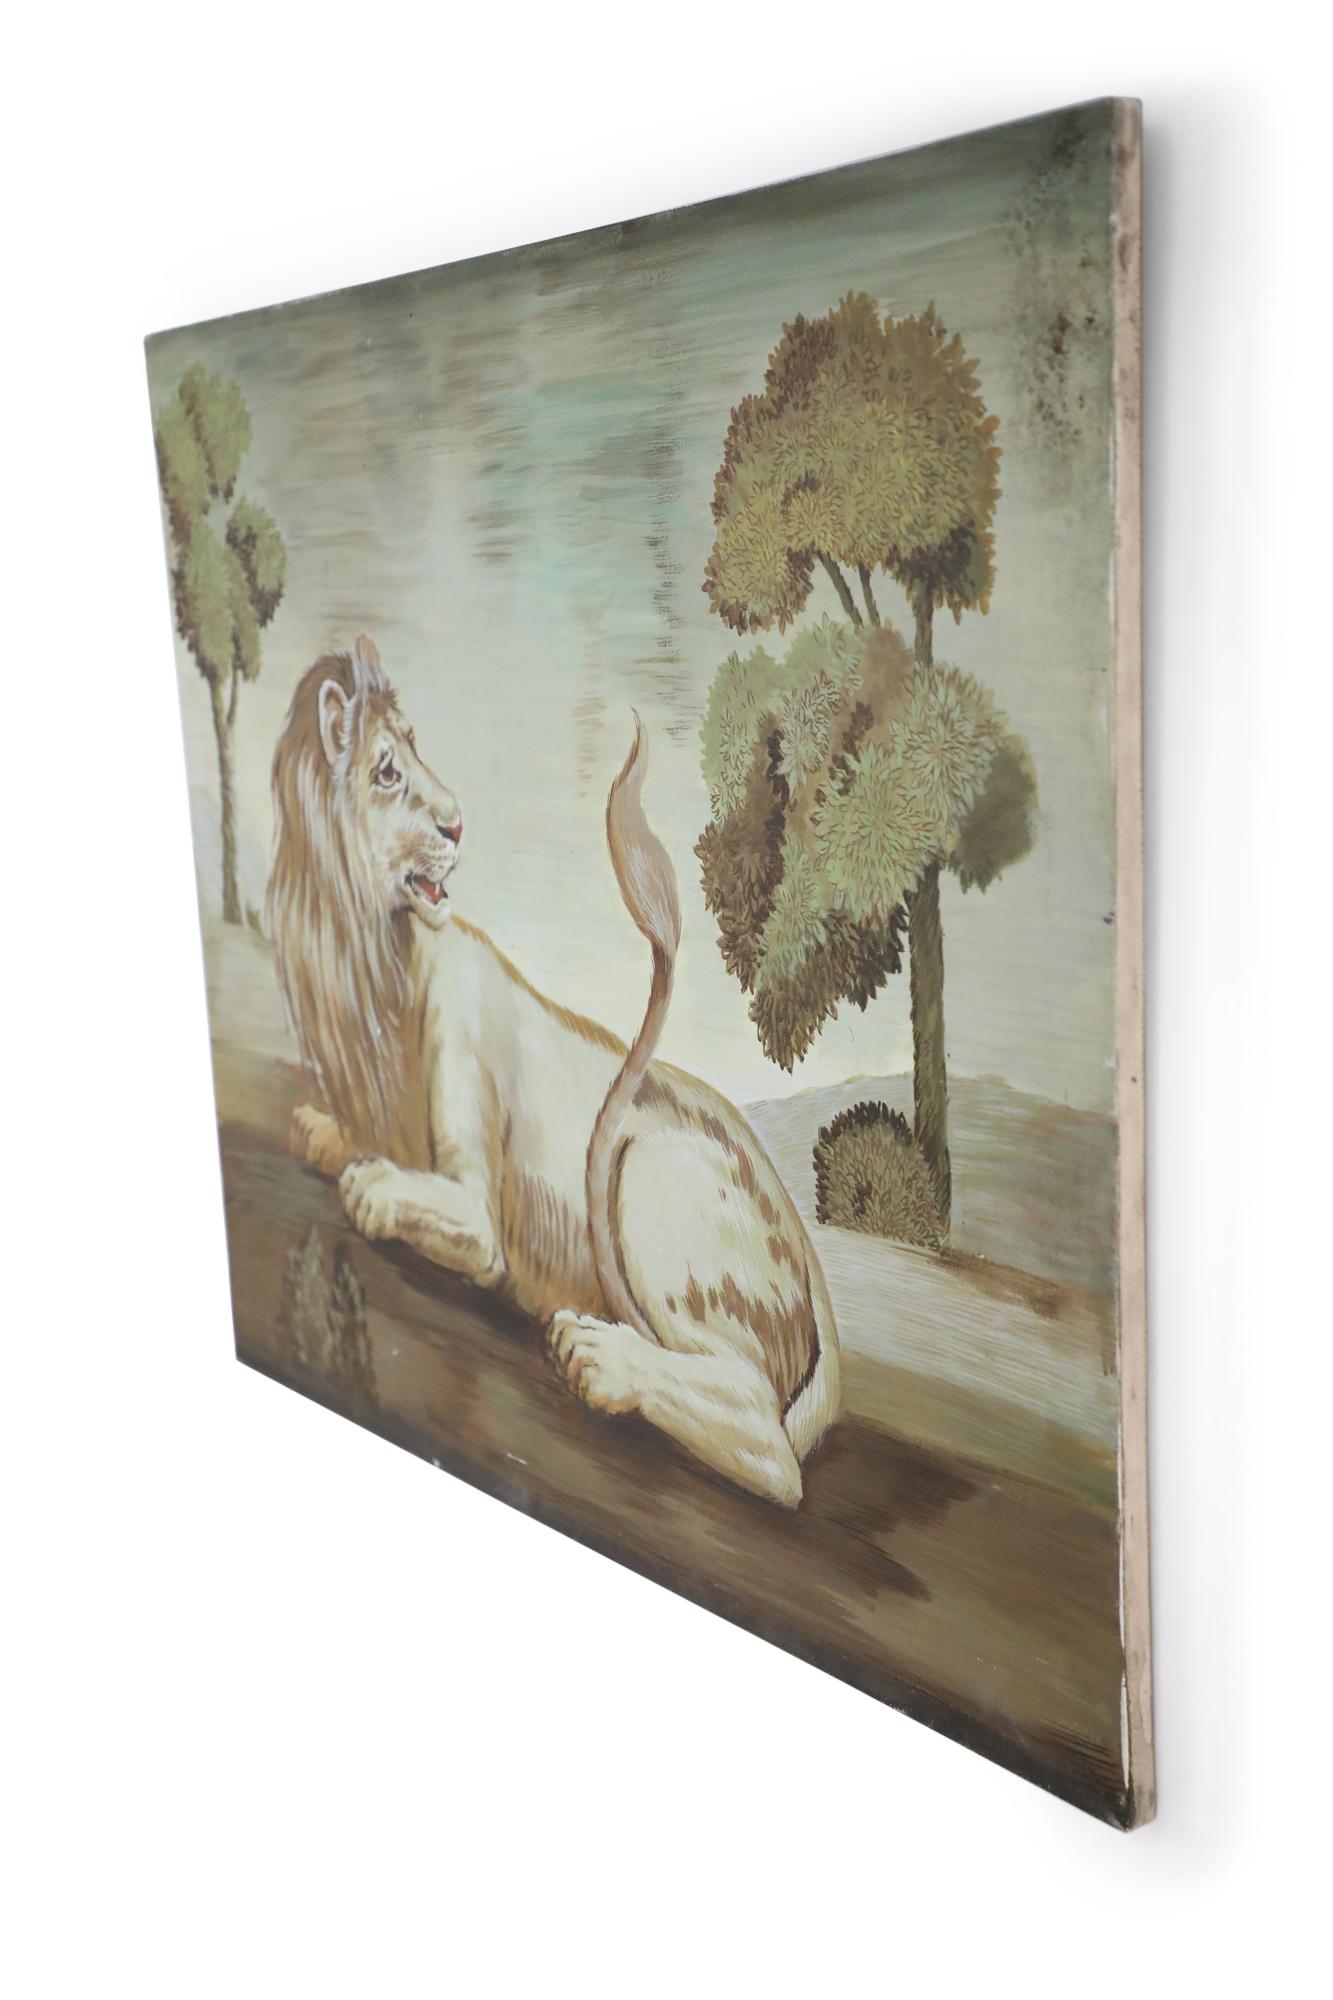 Vintage (20th Century) portrait of a lion lying down and looking back at his tail in a field populated with lush trees, painted in a muted palette of greens and browns on rectangular unframed canvas.